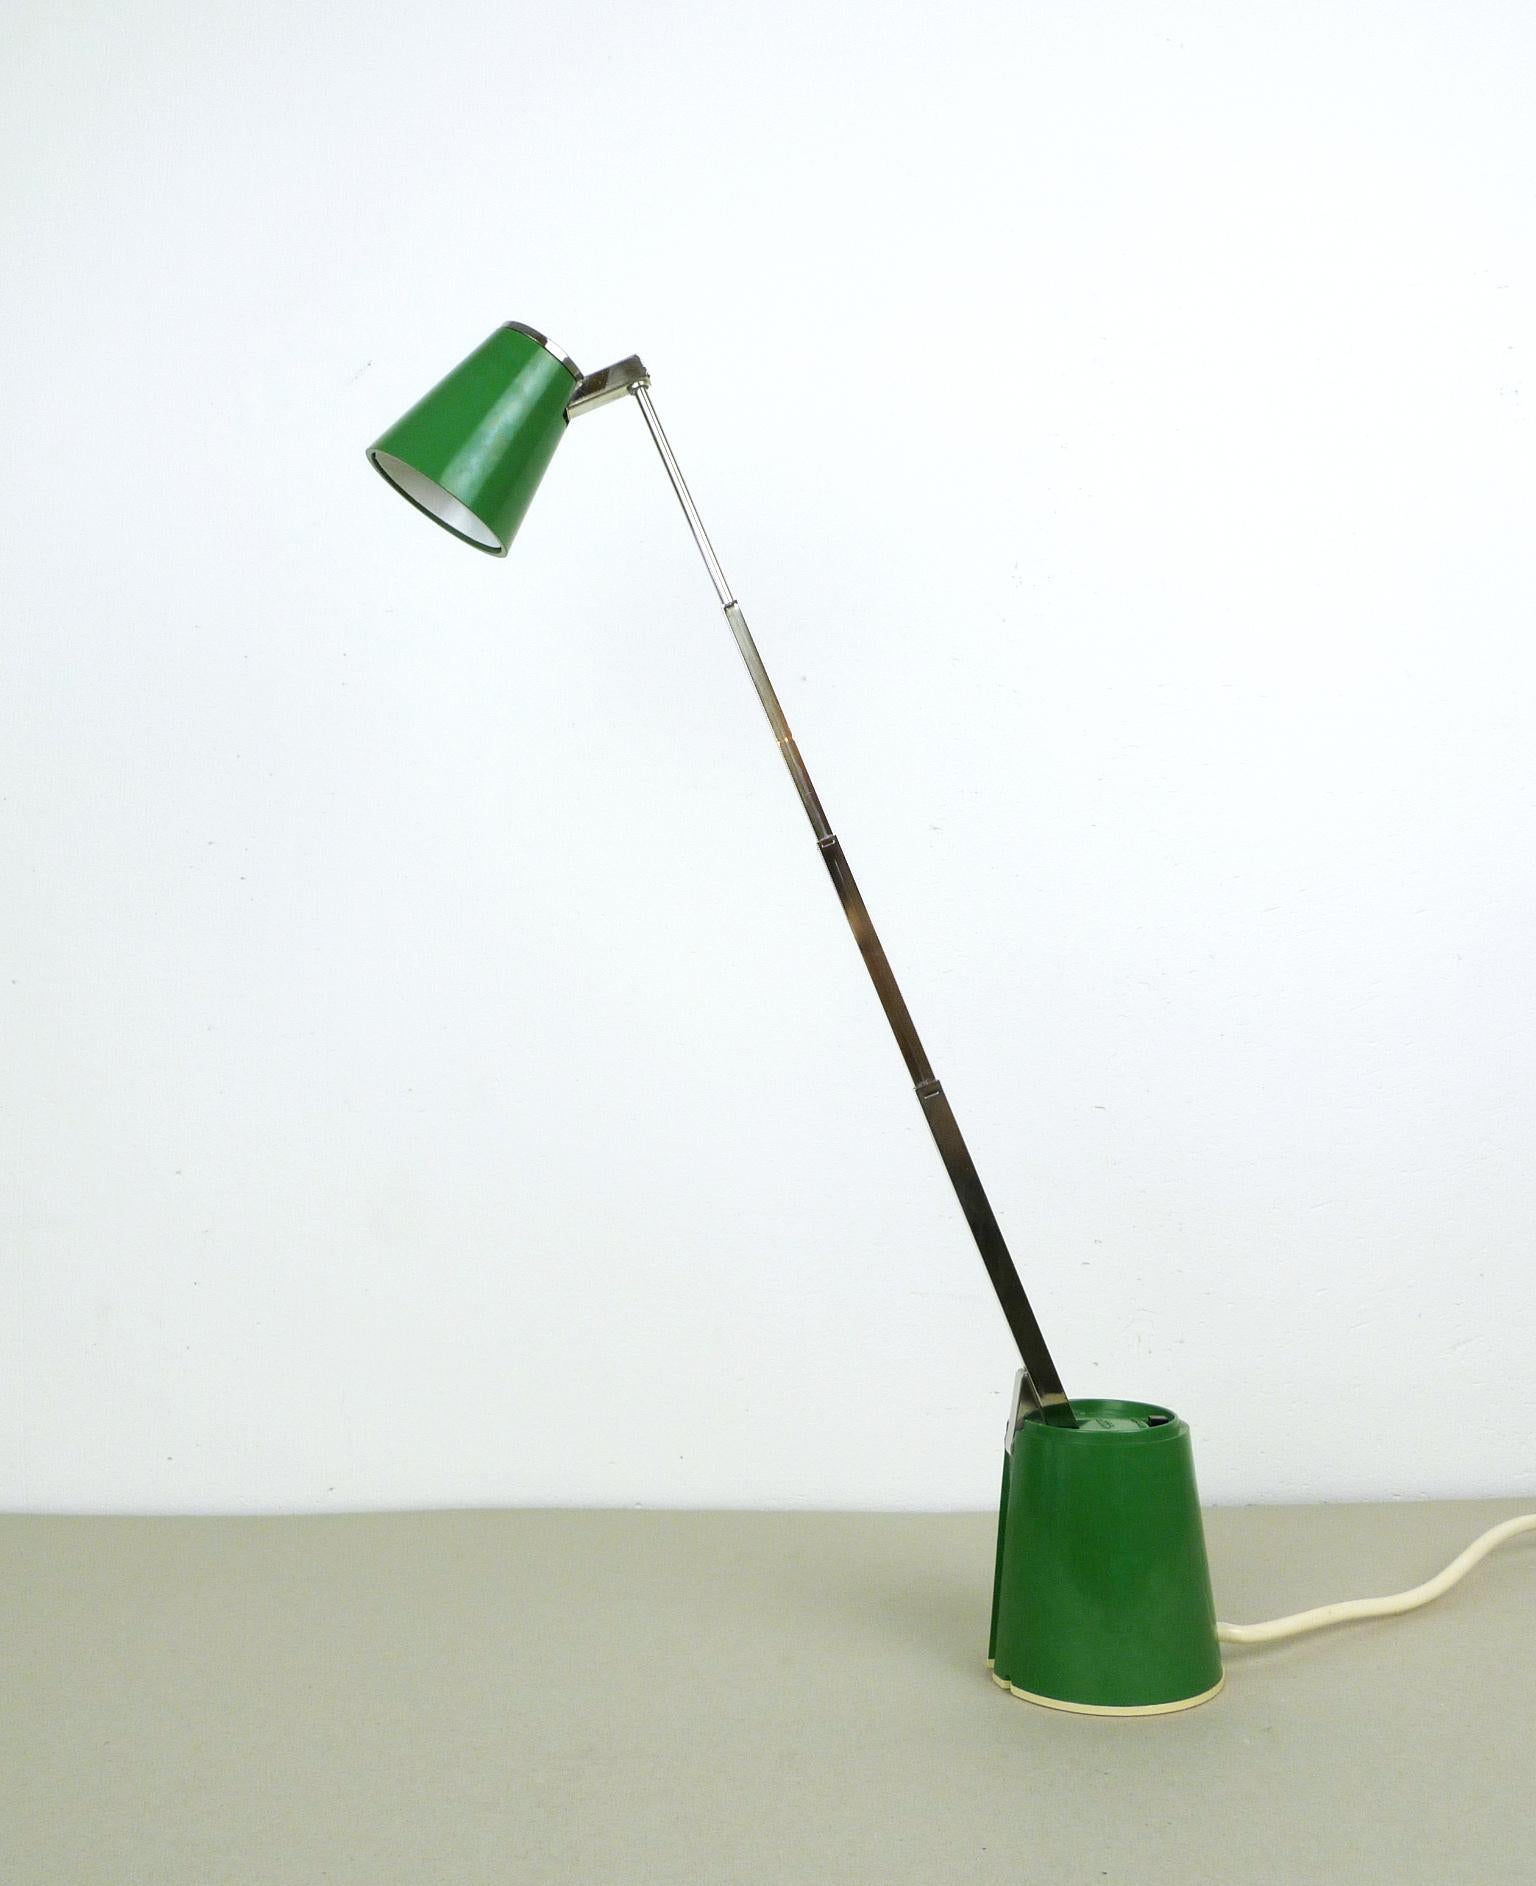 This multifunctional tripod lamp, model Lampette, was produced by the German manufacturer Eichhoff in the 1960s. The lamp can be folded to a compact size of 15 cm to serve as a reading light when traveling. A firm stand is ensured by a fold-out